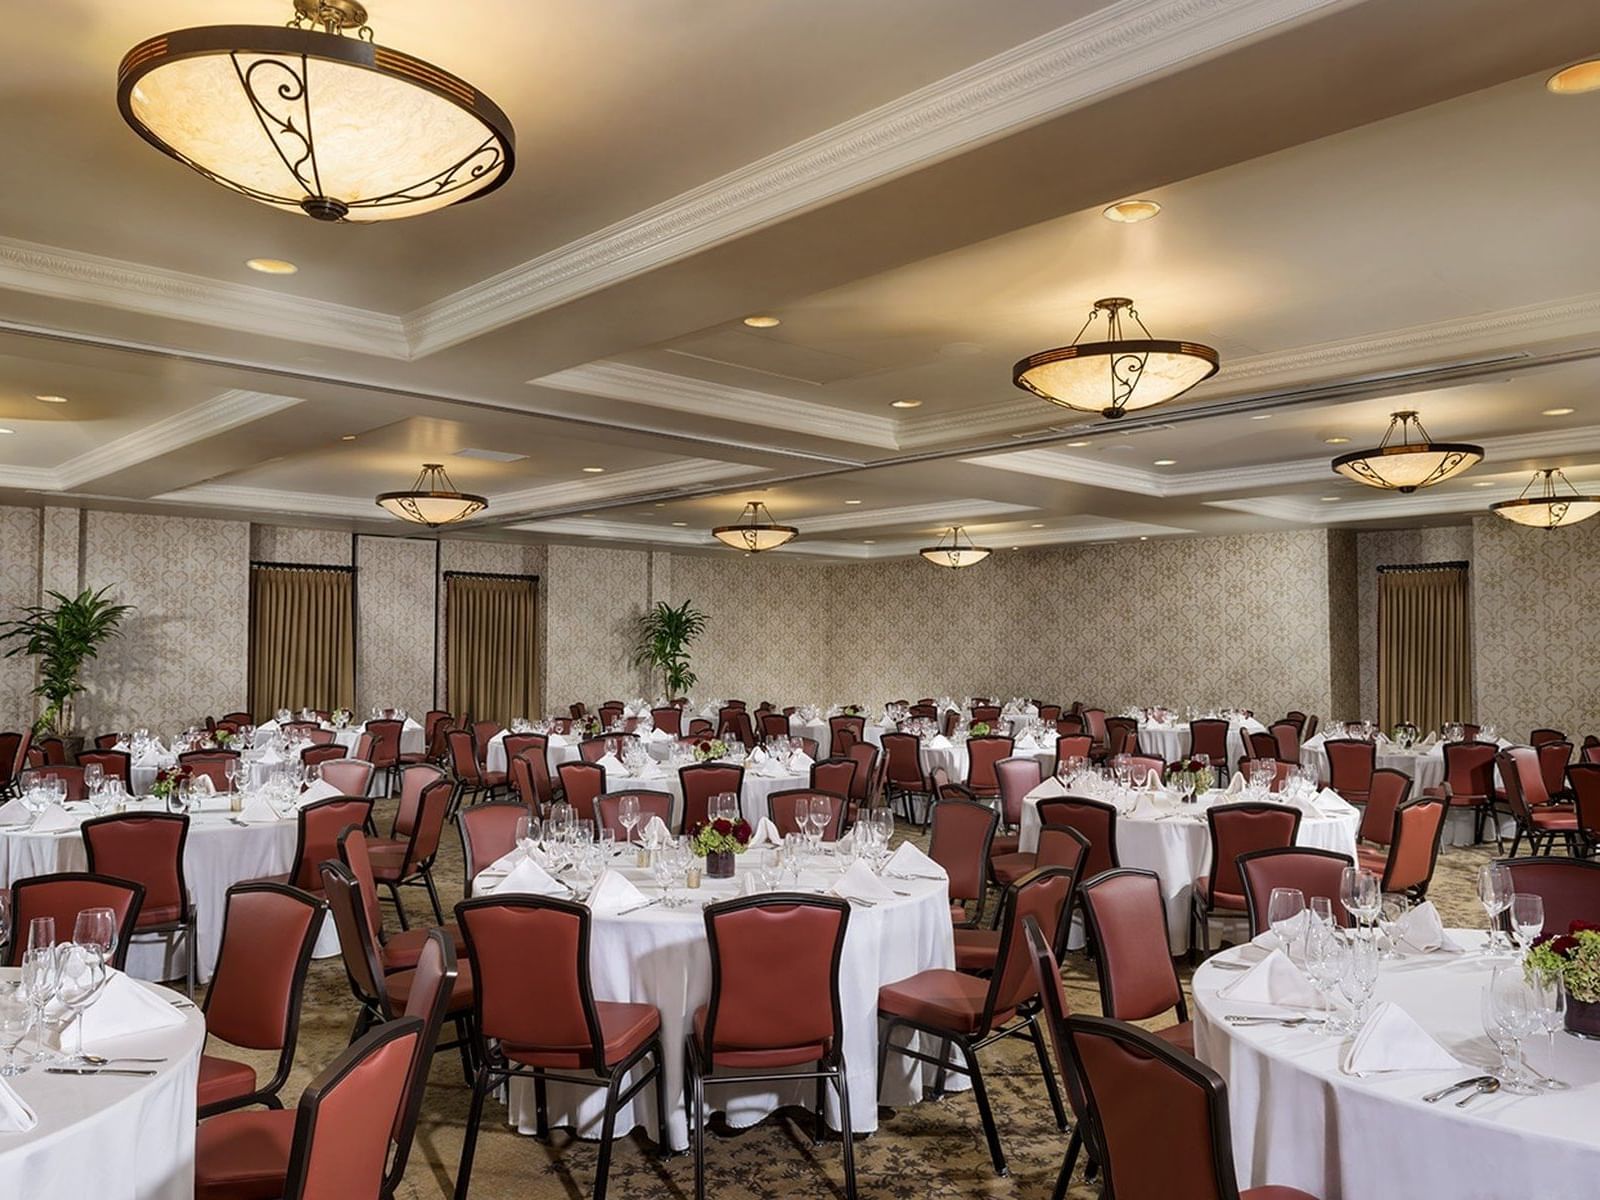 Ballroom with round tables set for dining